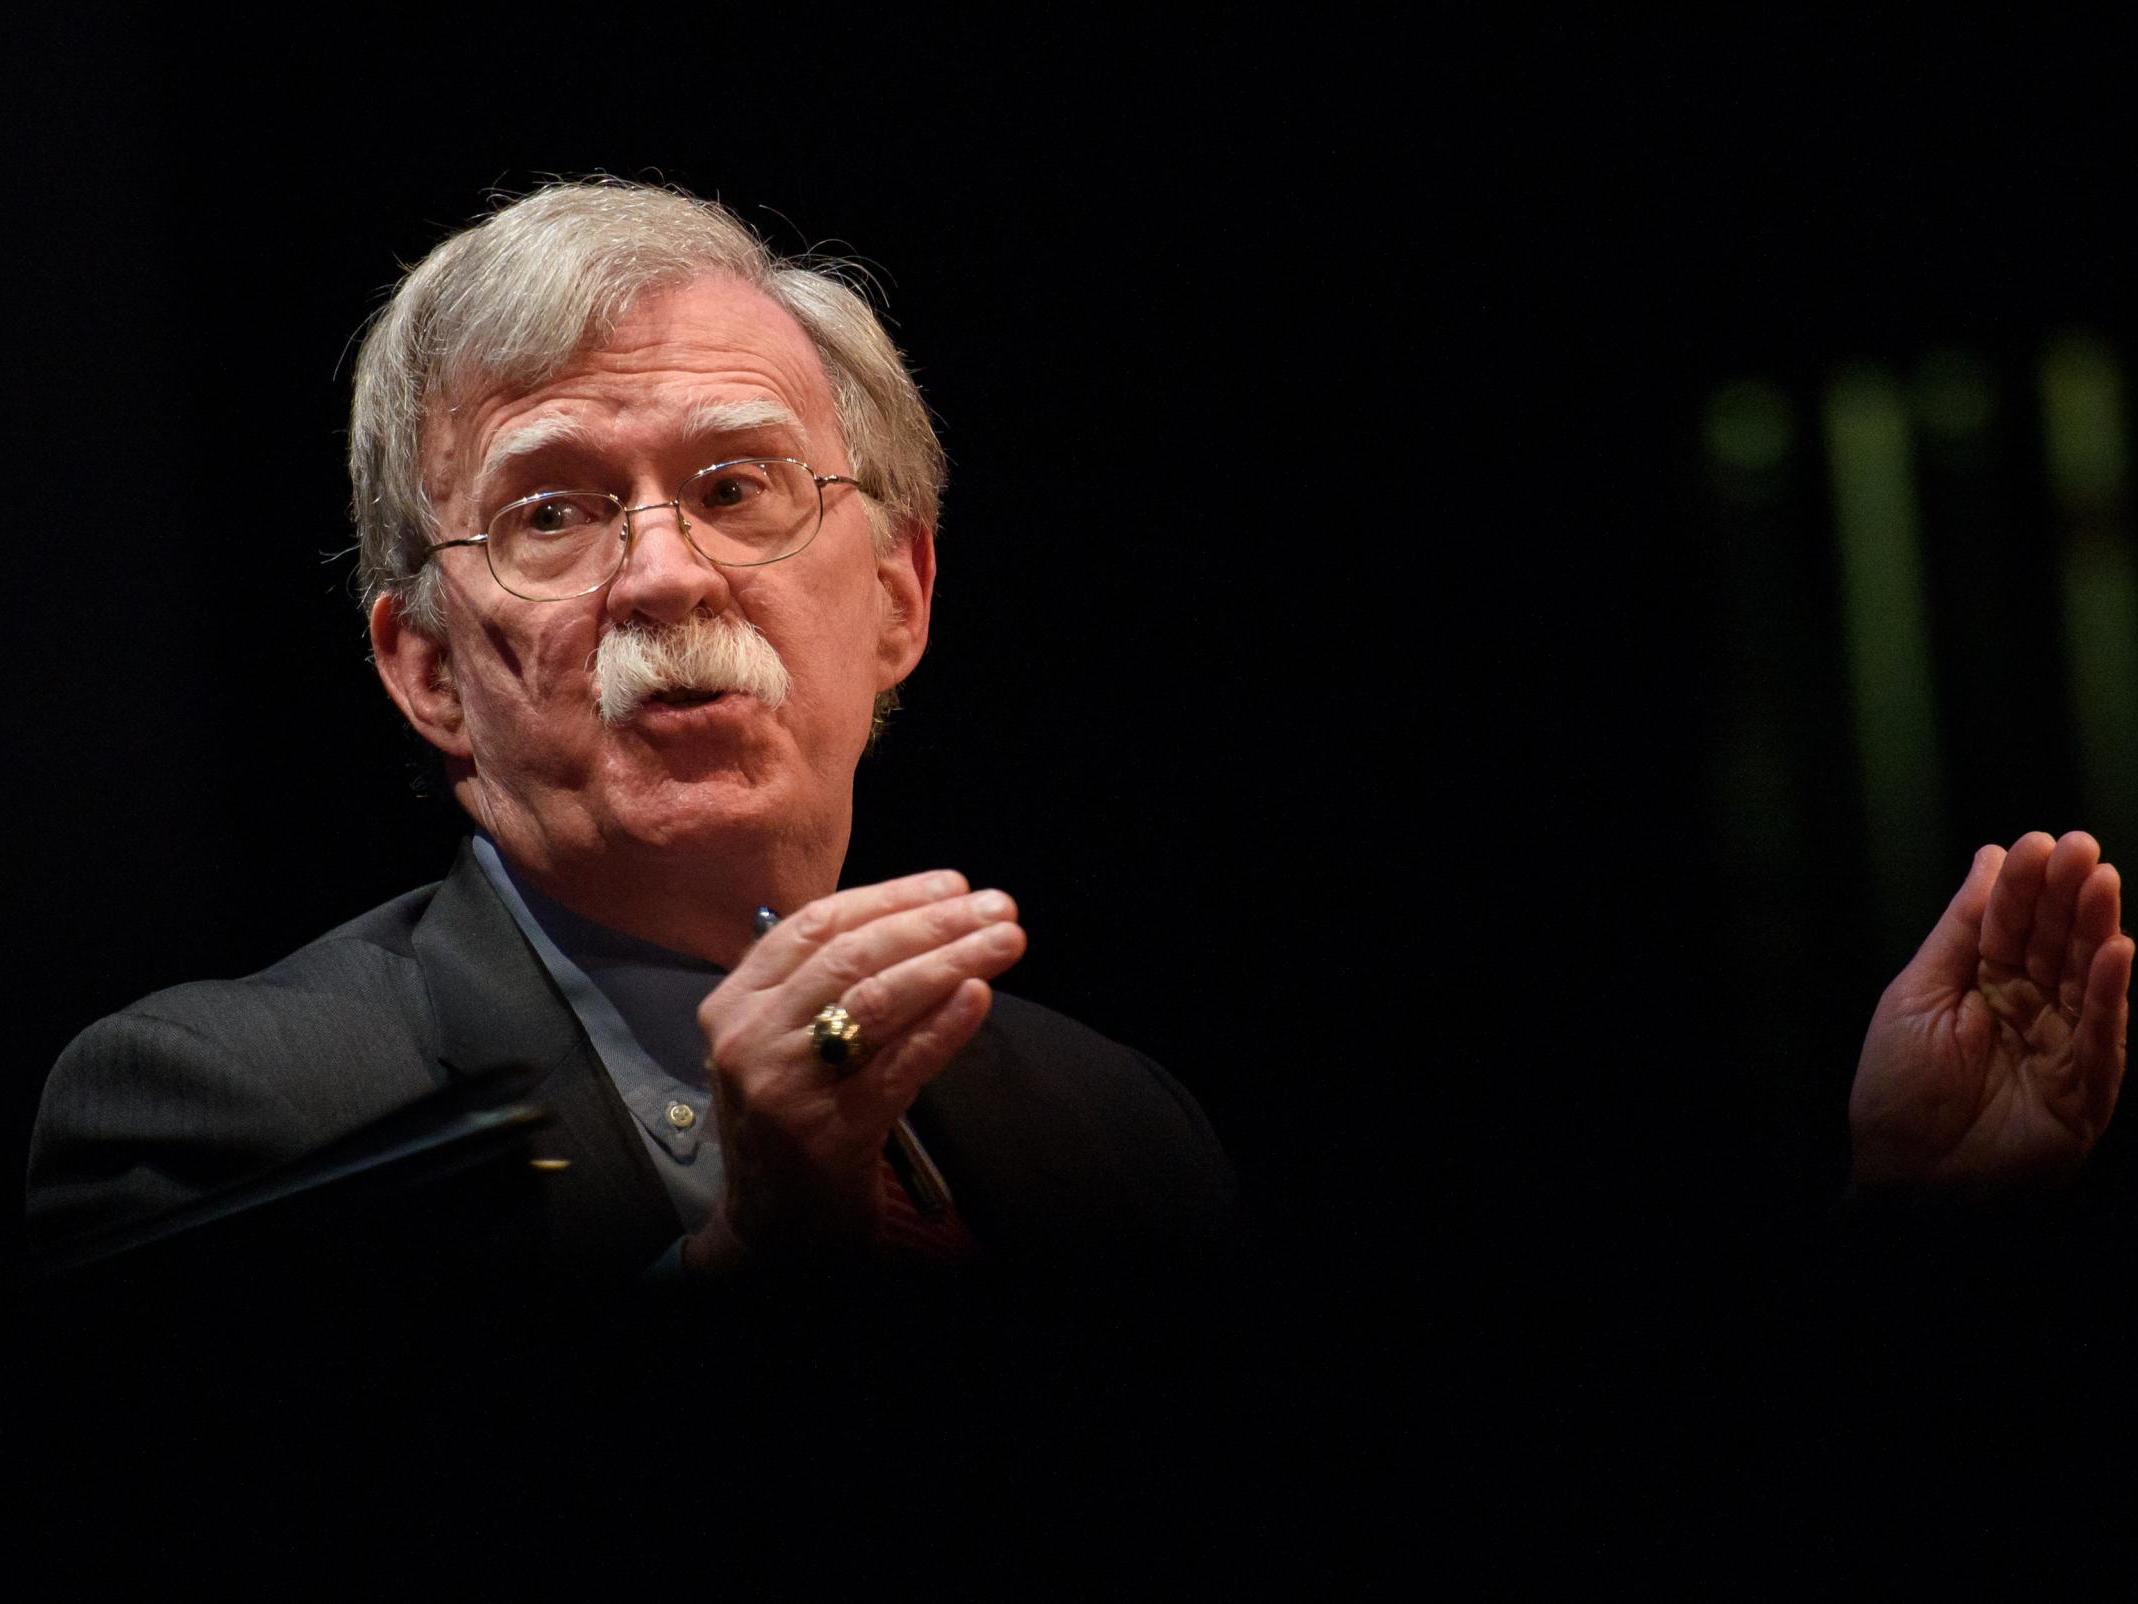 Trump committed other 'Ukraine-like transgressions', new John Bolton book alleges